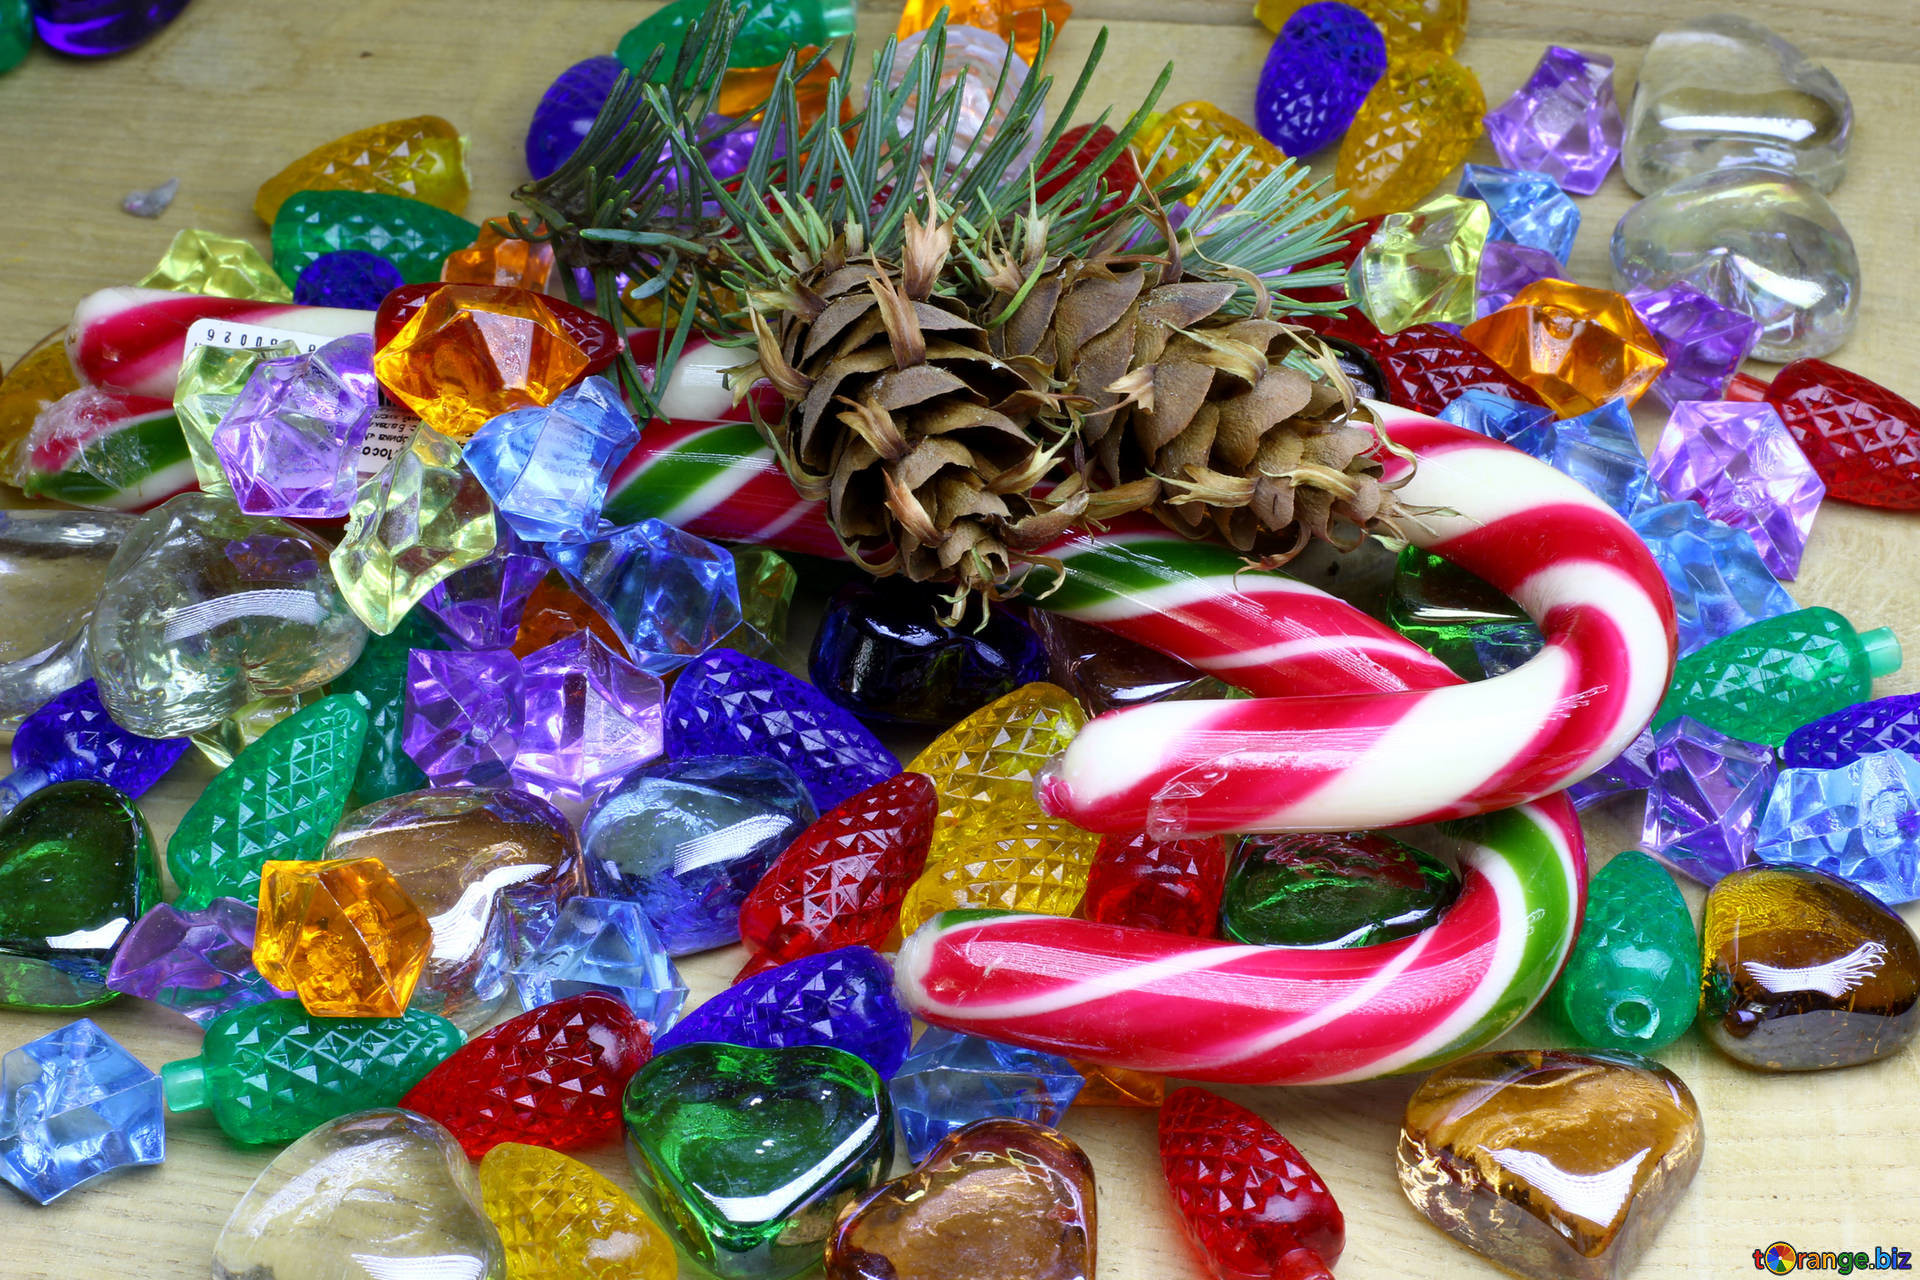 1920x1280 Download free image Christmas sweets in HD wallpaper size 1920px